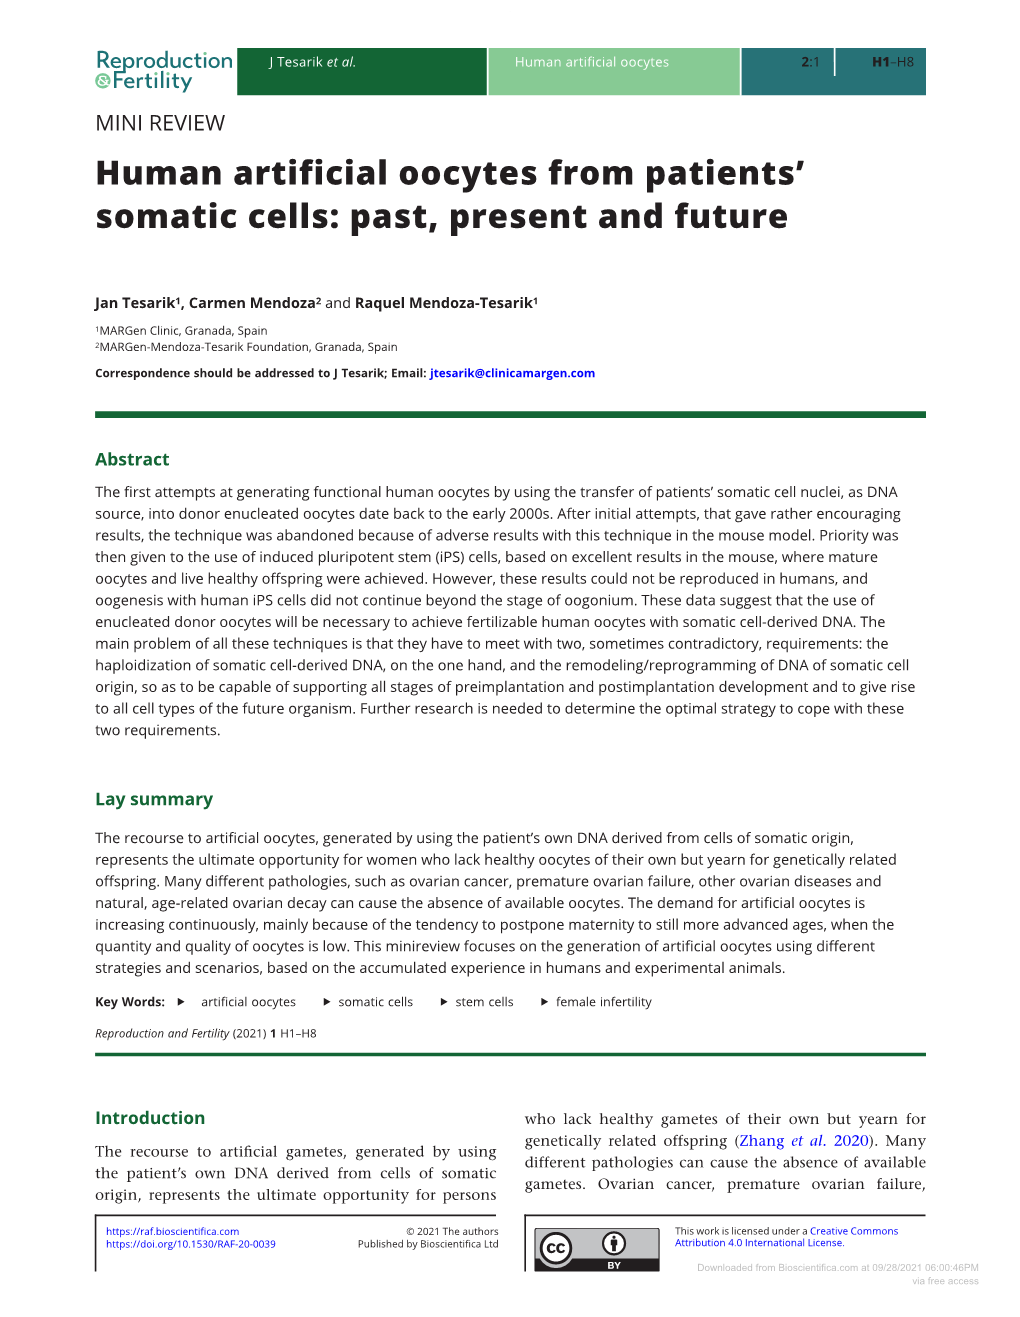 Human Artificial Oocytes from Patients' Somatic Cells